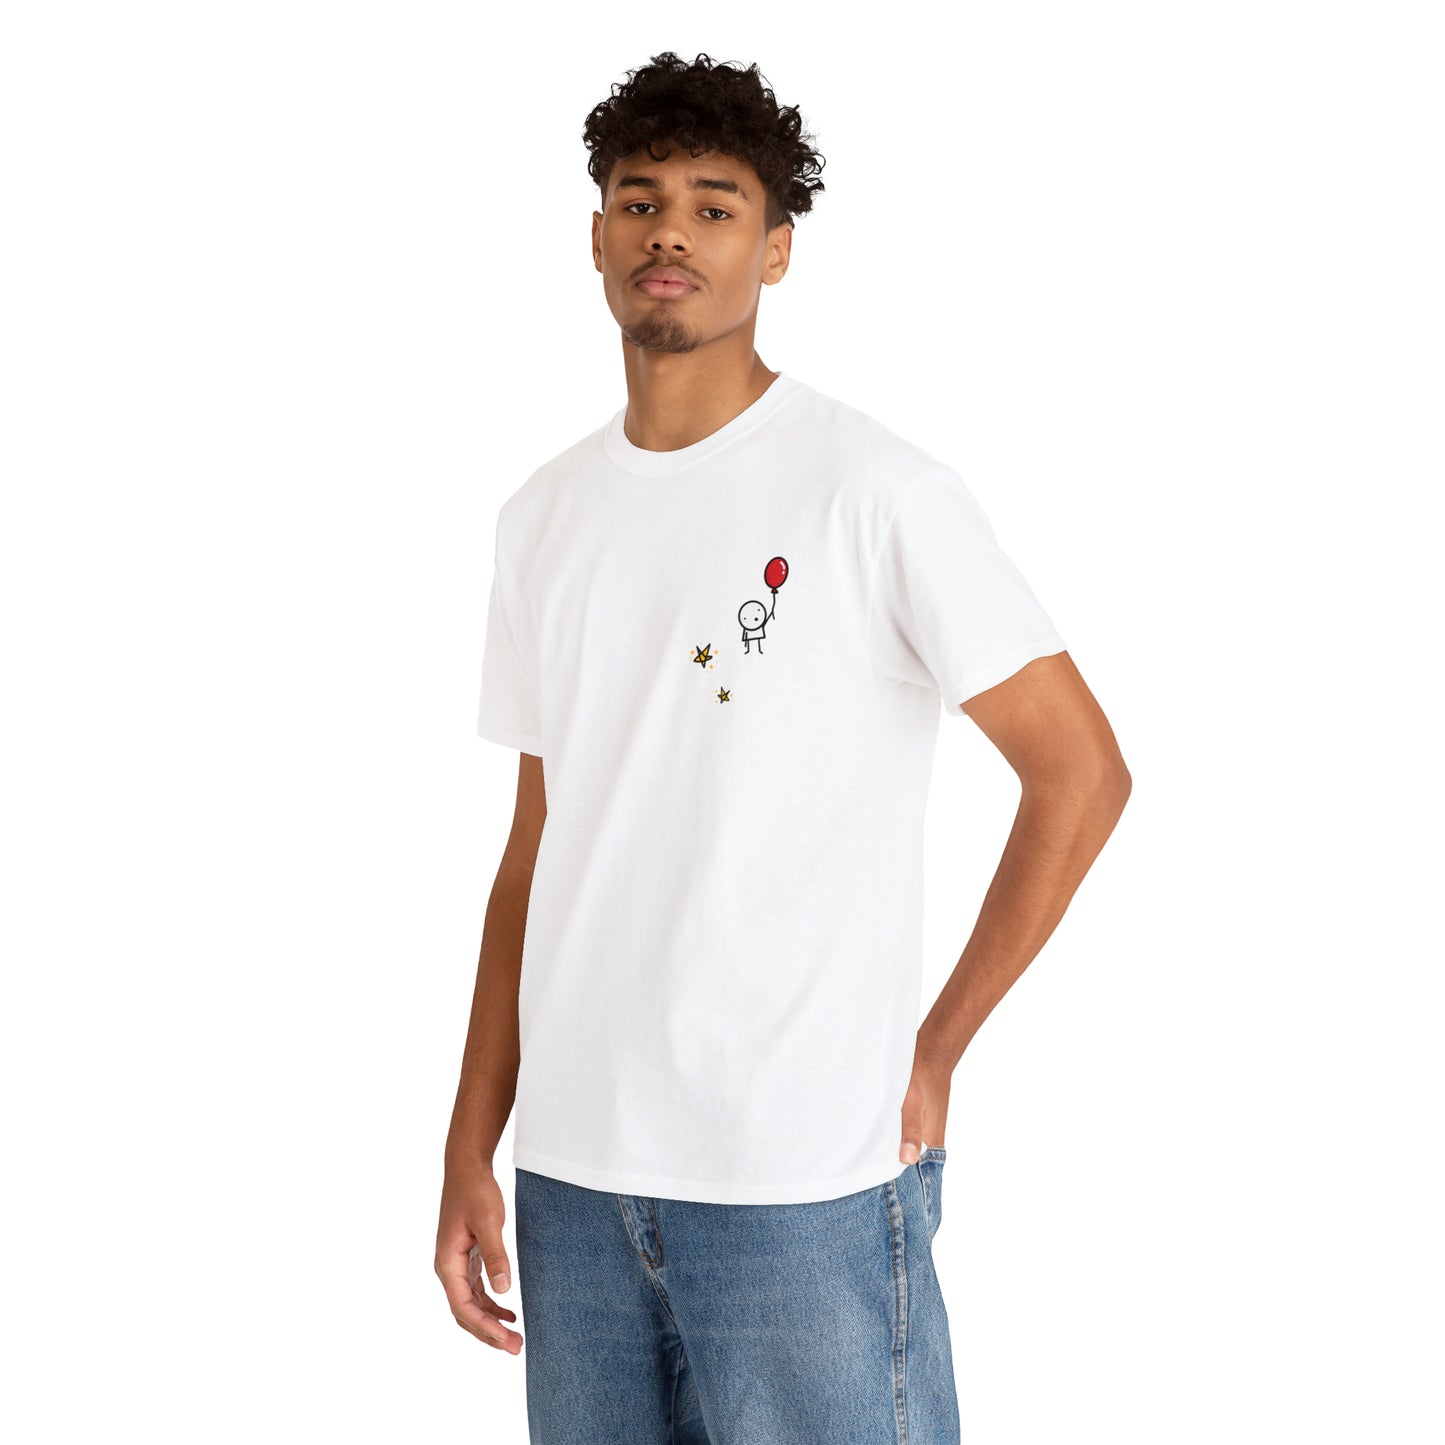 Boy with Balloon and Stars - Adult Heavy Cotton™ Tee